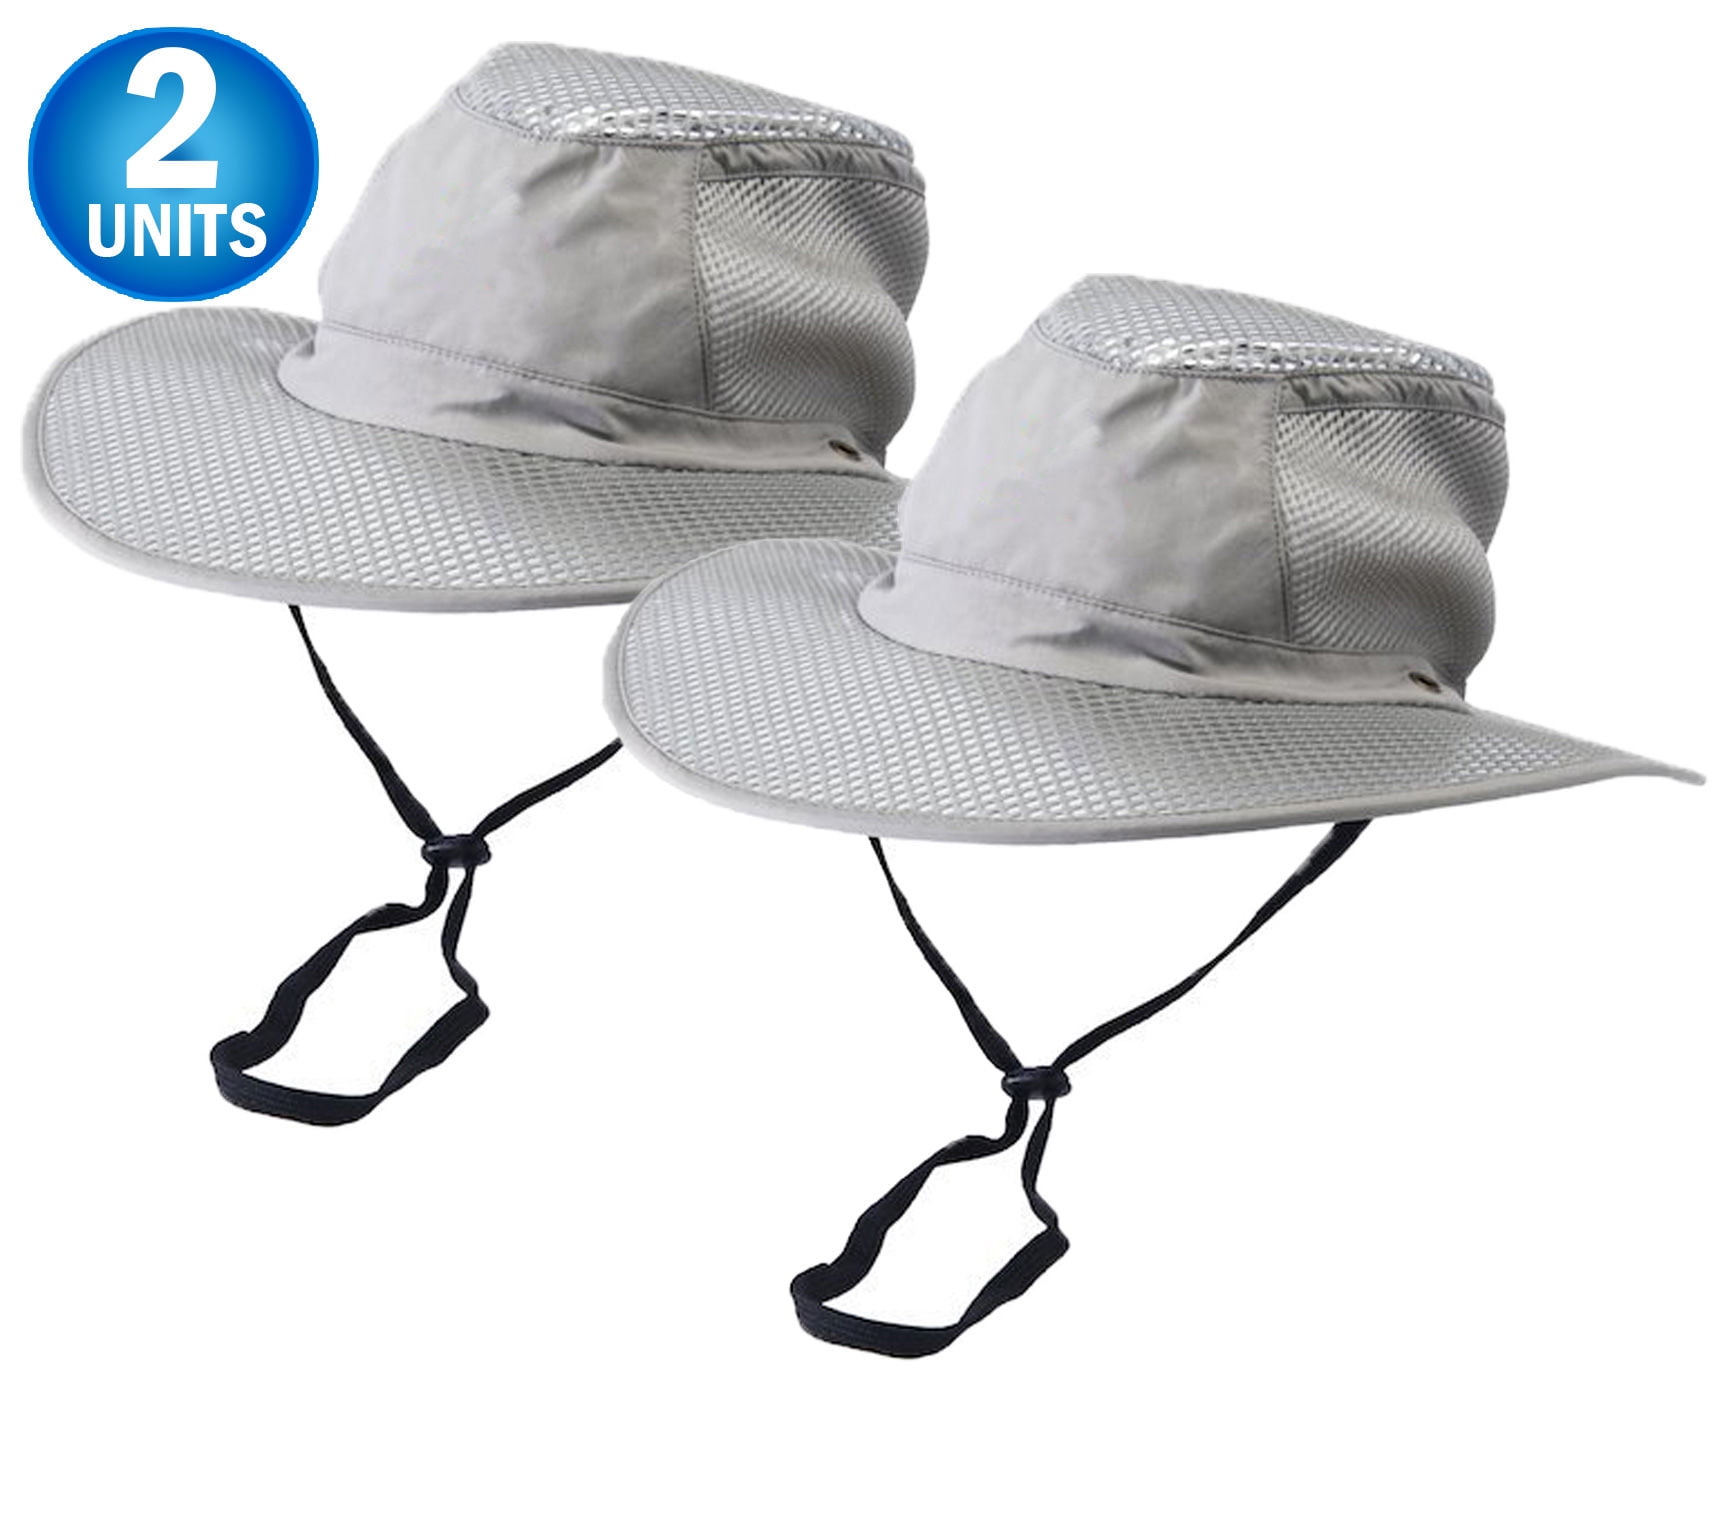 Arctic Hat  As Seen On TV  Evaporative Cooling  Hat  Beige  One Size Fits Most 